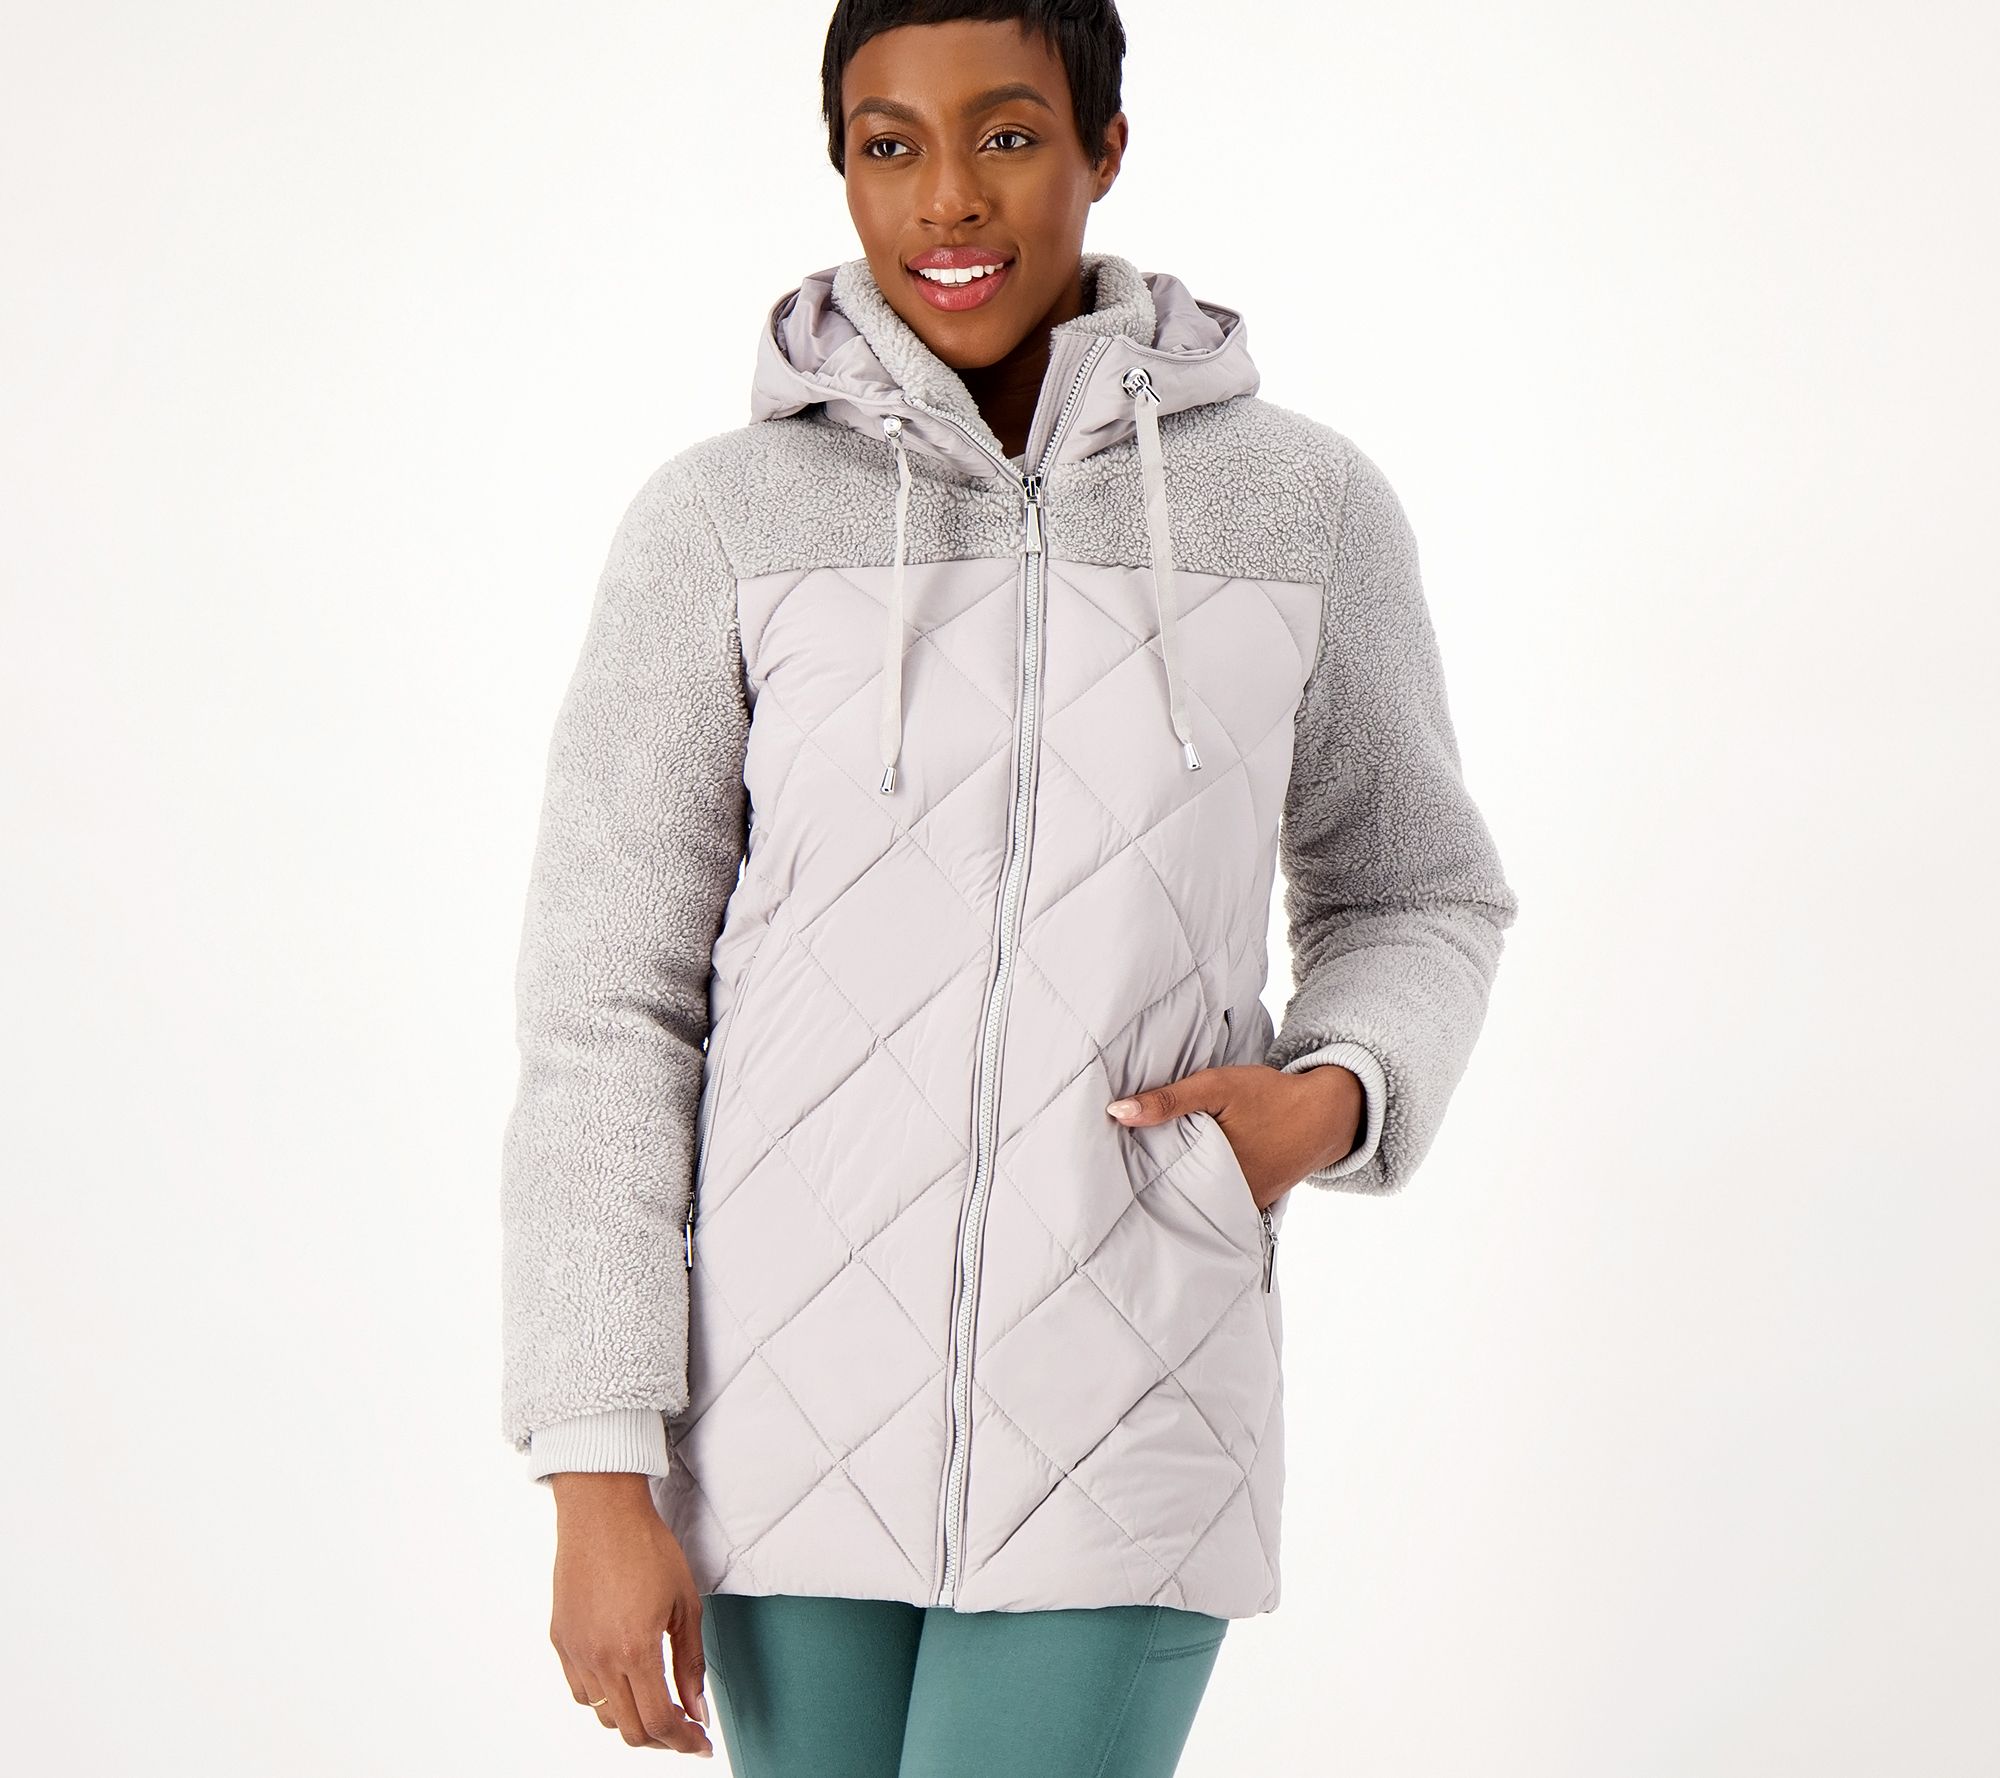 Women's Koolaburra by UGG Reversible Quilted Puffer to Sherpa Long